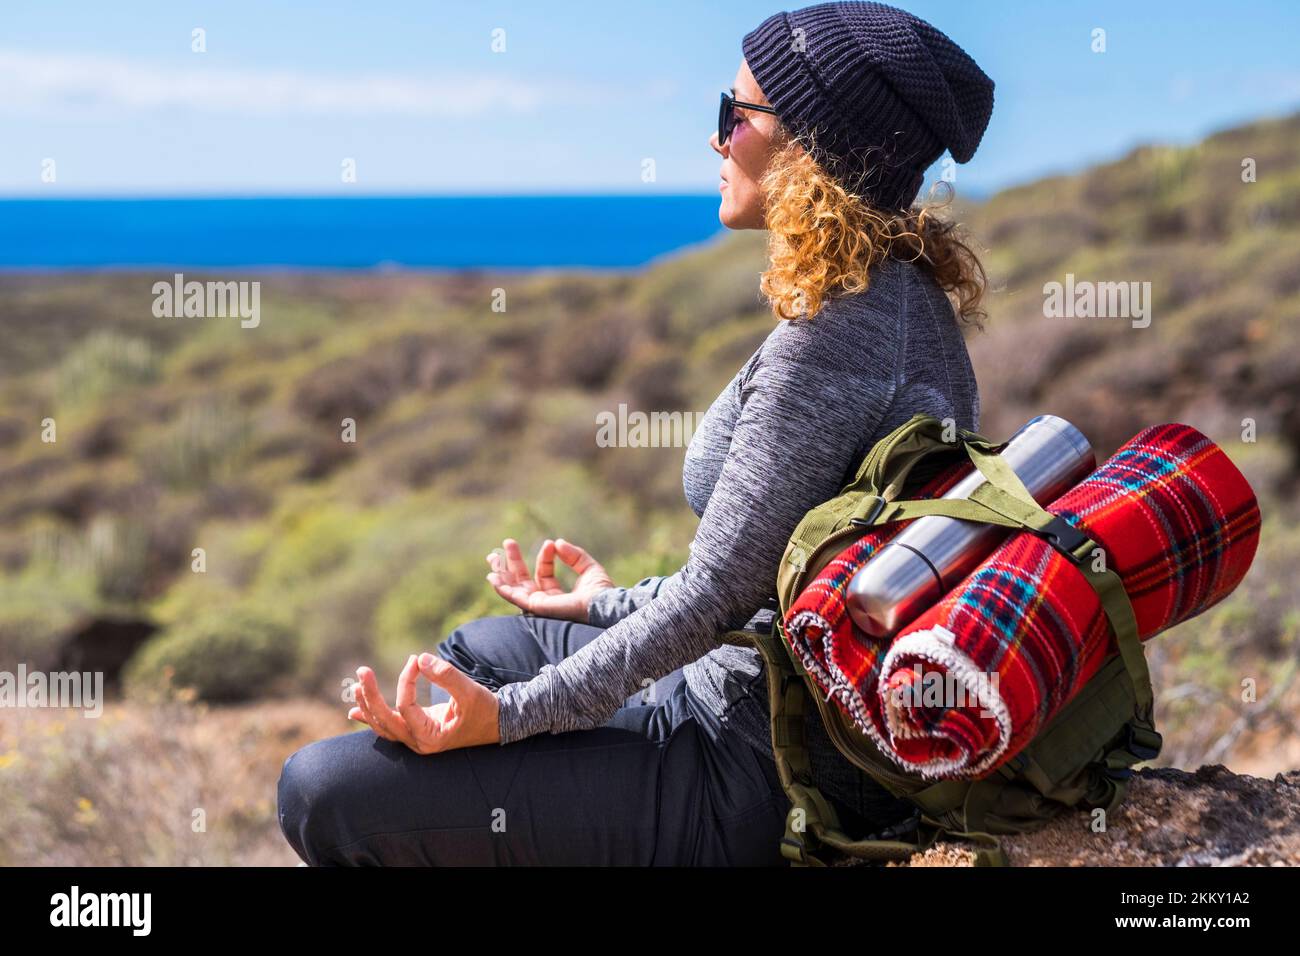 Zen and meditation activity in outdoor leisure lifestyle. Woman with backpack doing lotus position yoga. Concept of alternative healthy lifestyle and Stock Photo